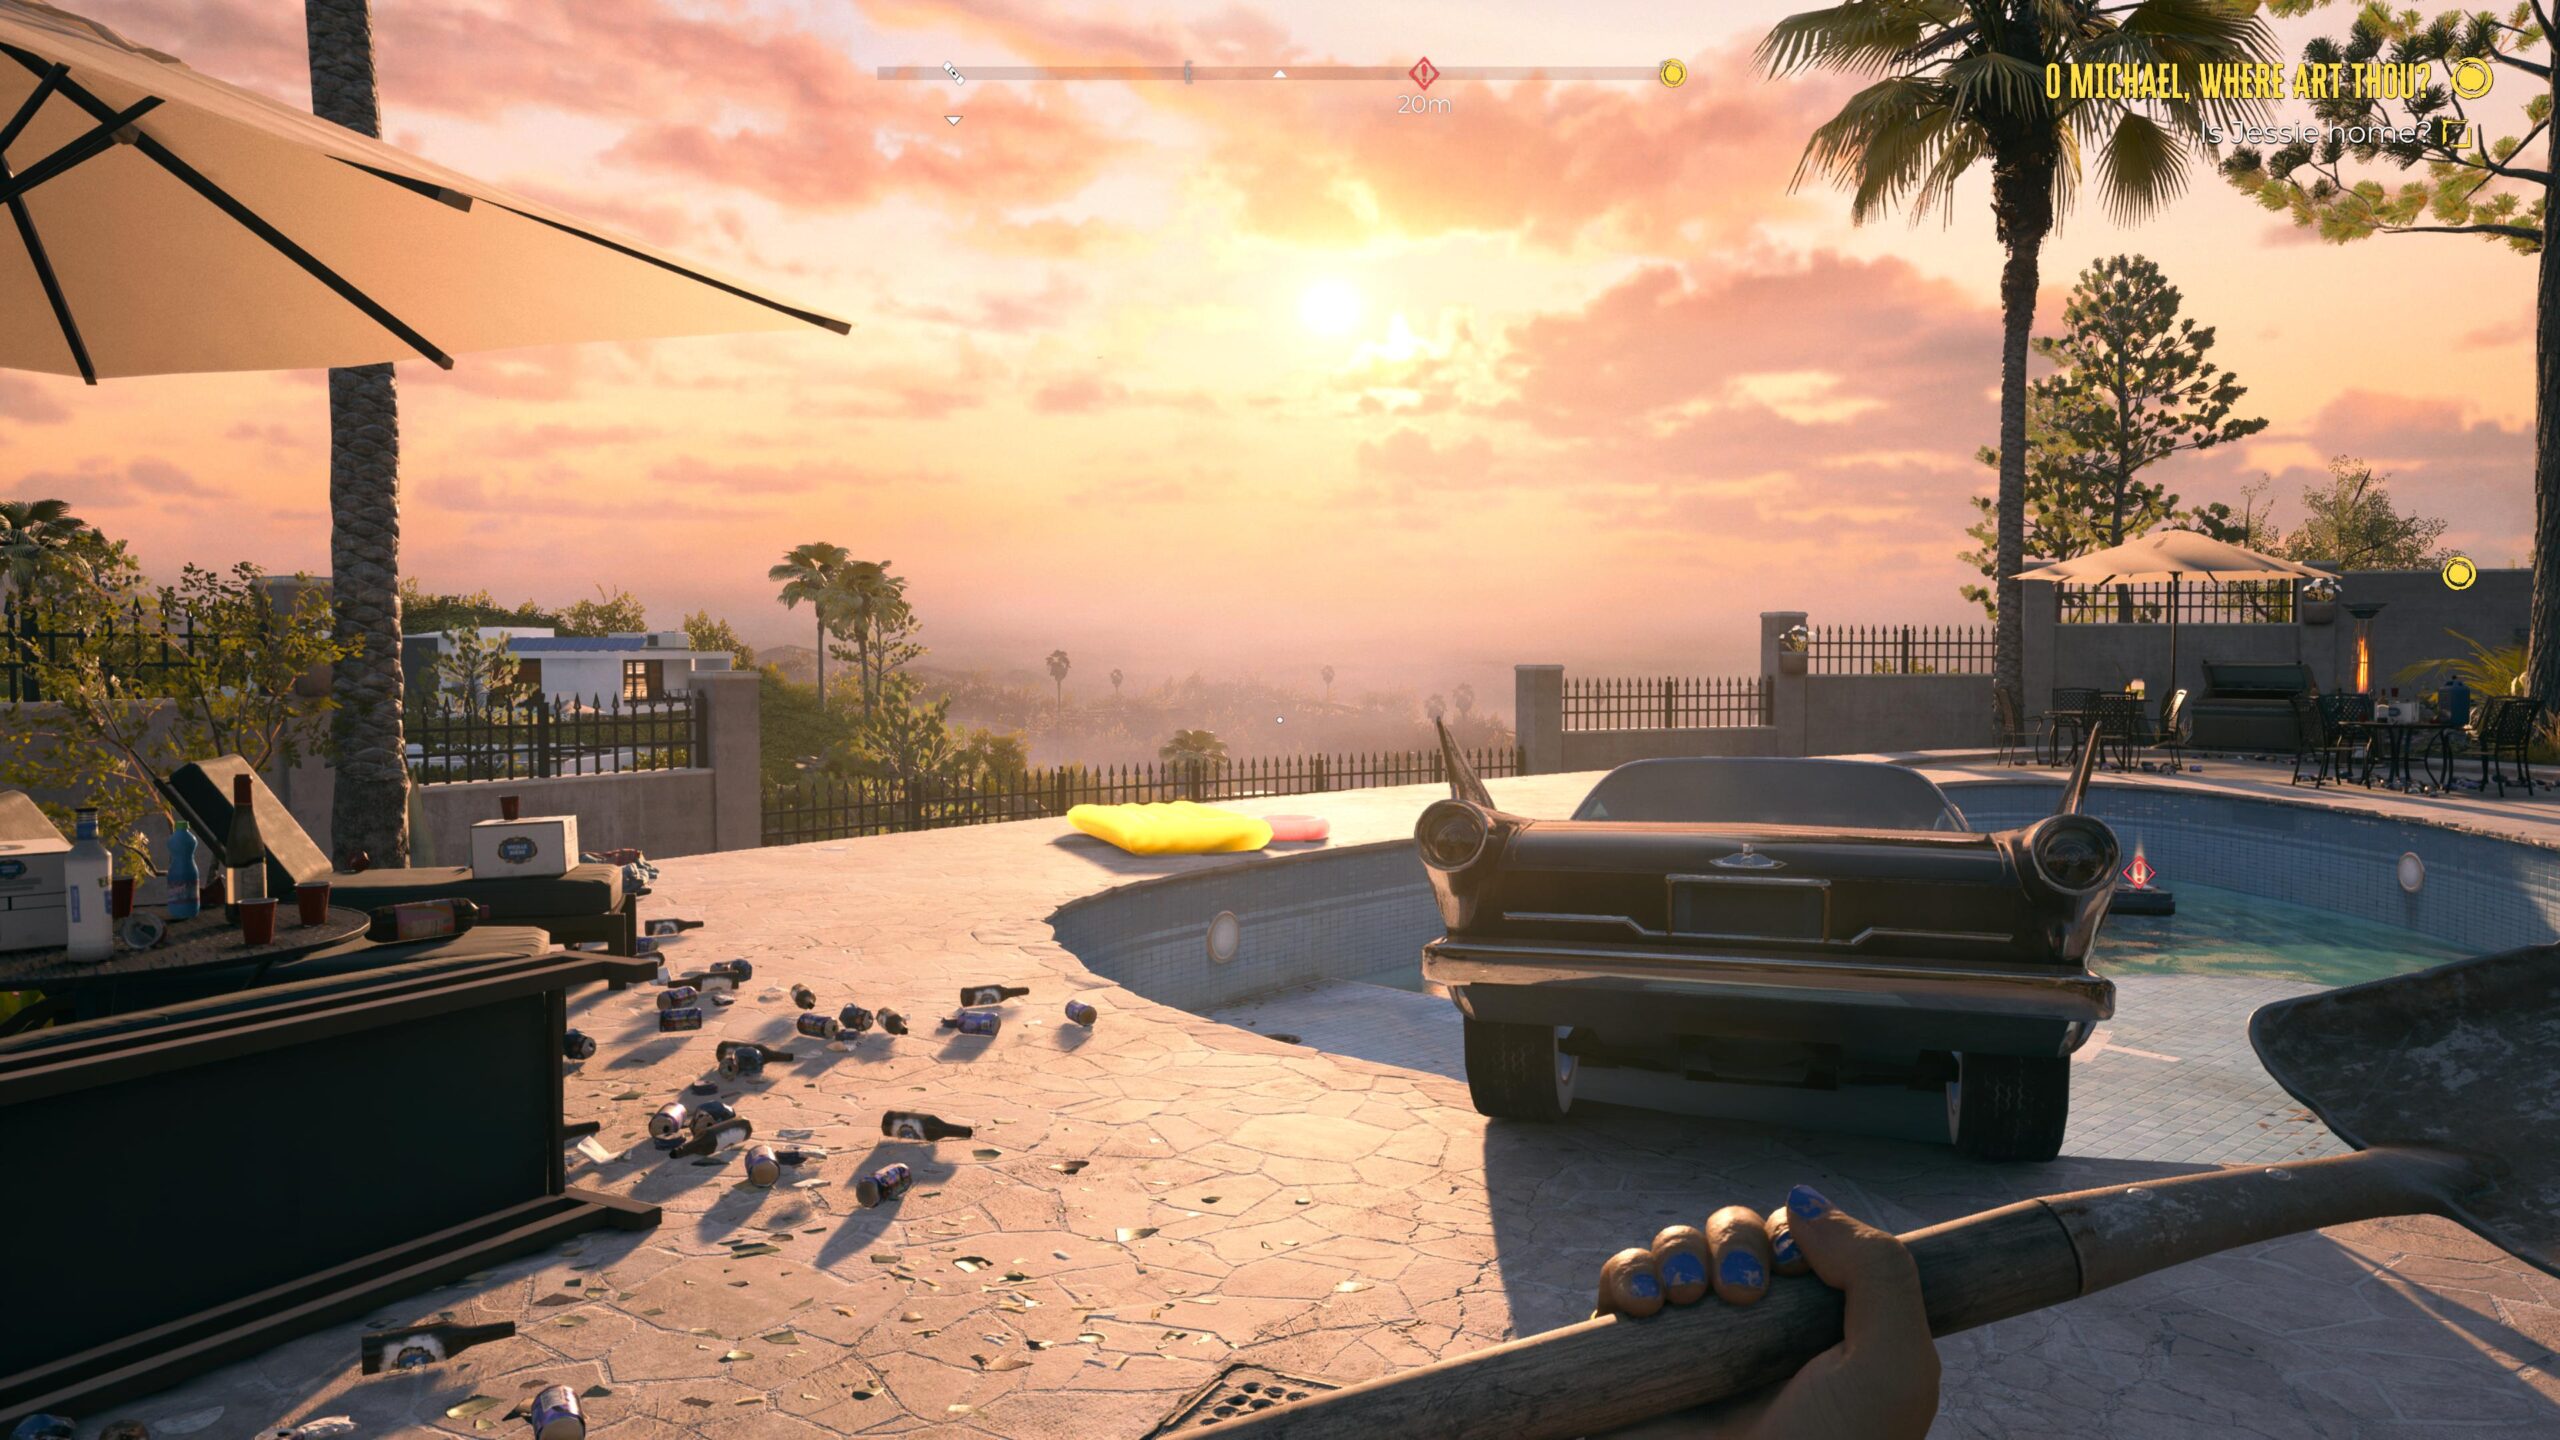 Dead Island 2 review: Not much to chew on